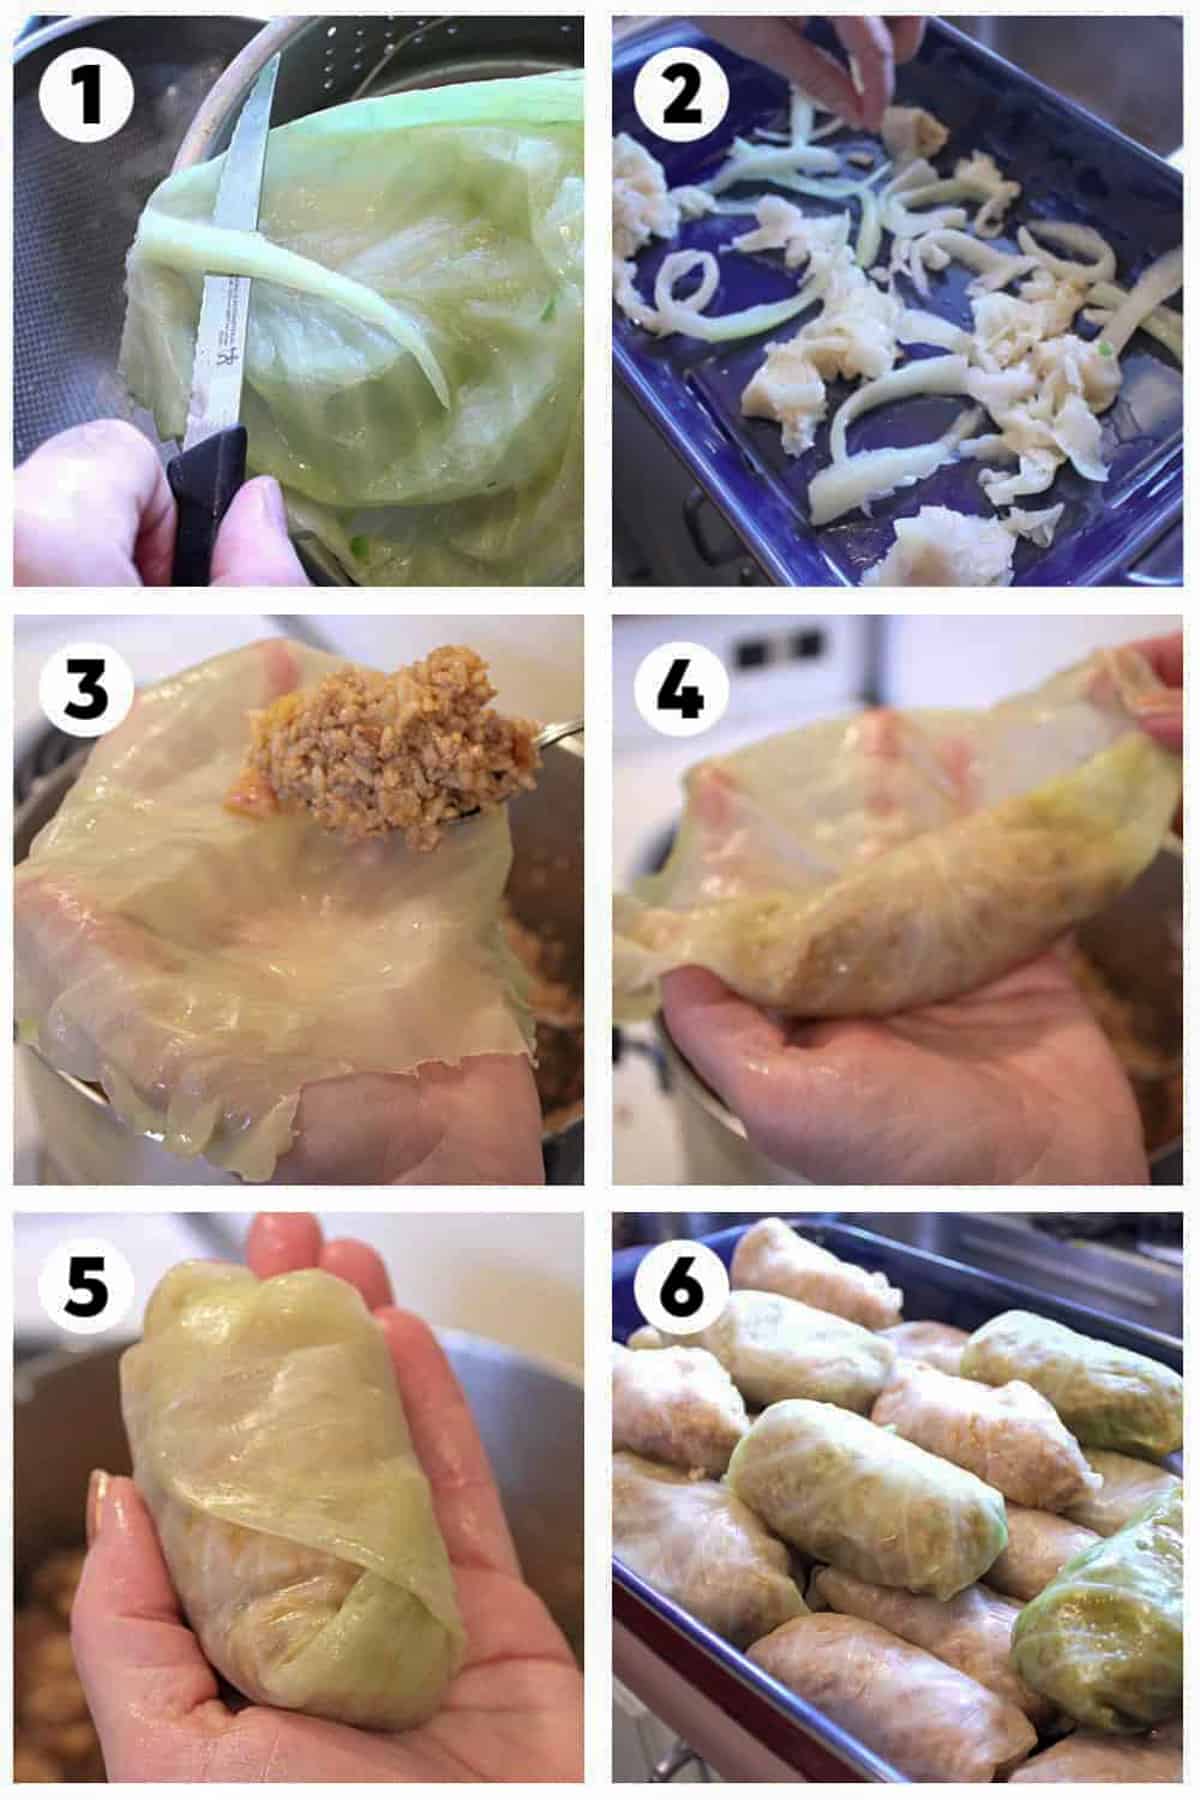 Step bit step photos showing how to make a cabbage roll.